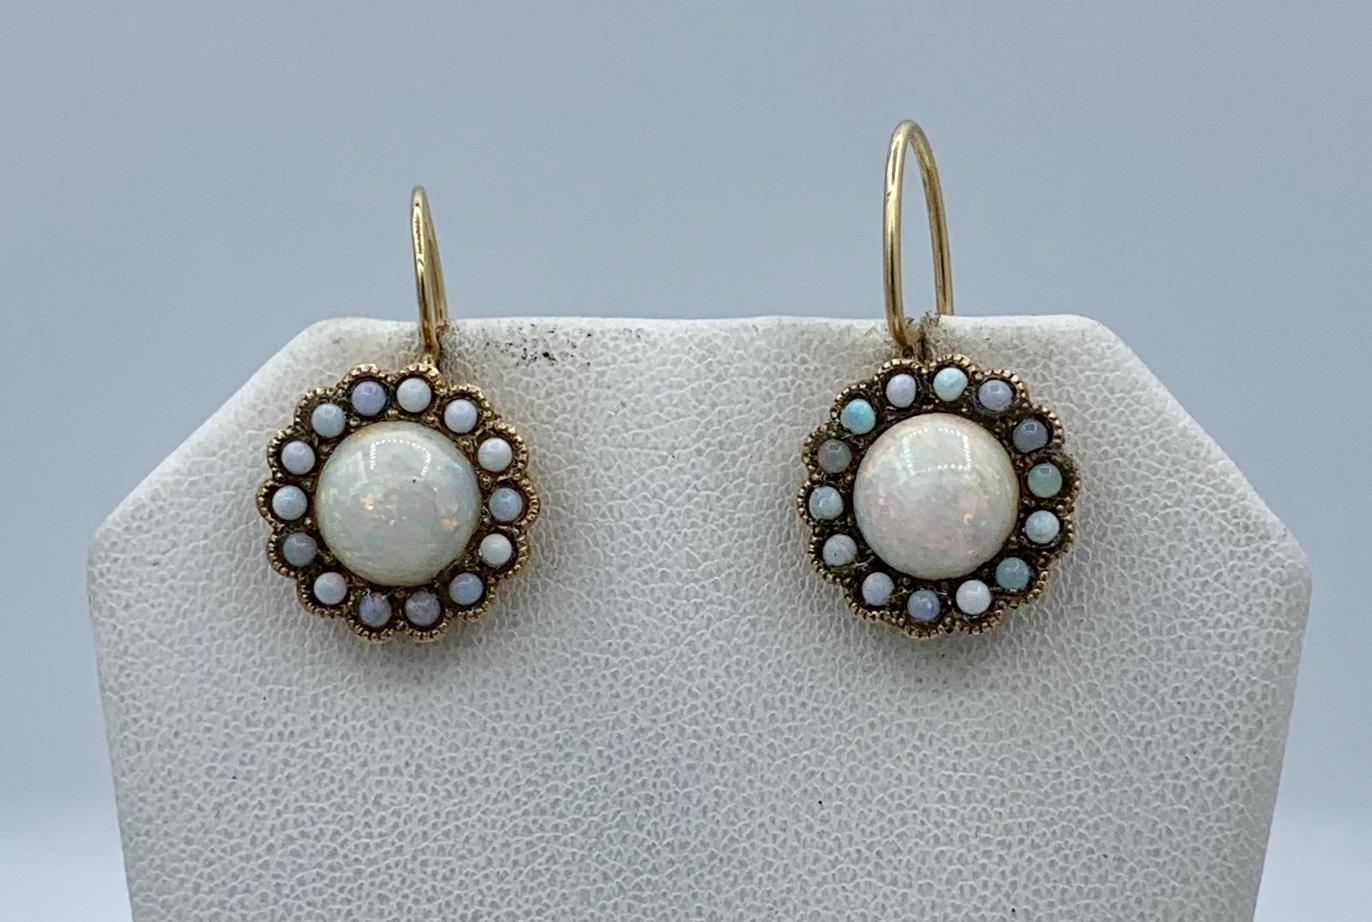 A gorgeous pair of antique Art Deco Opal Earrings with spectacular round Opal cabochons of great beauty surrounded by a halo of smaller opal cabochons set in 14 Karat Gold.  The colors in these Opals are vivid blues and greens, yellows, oranges and